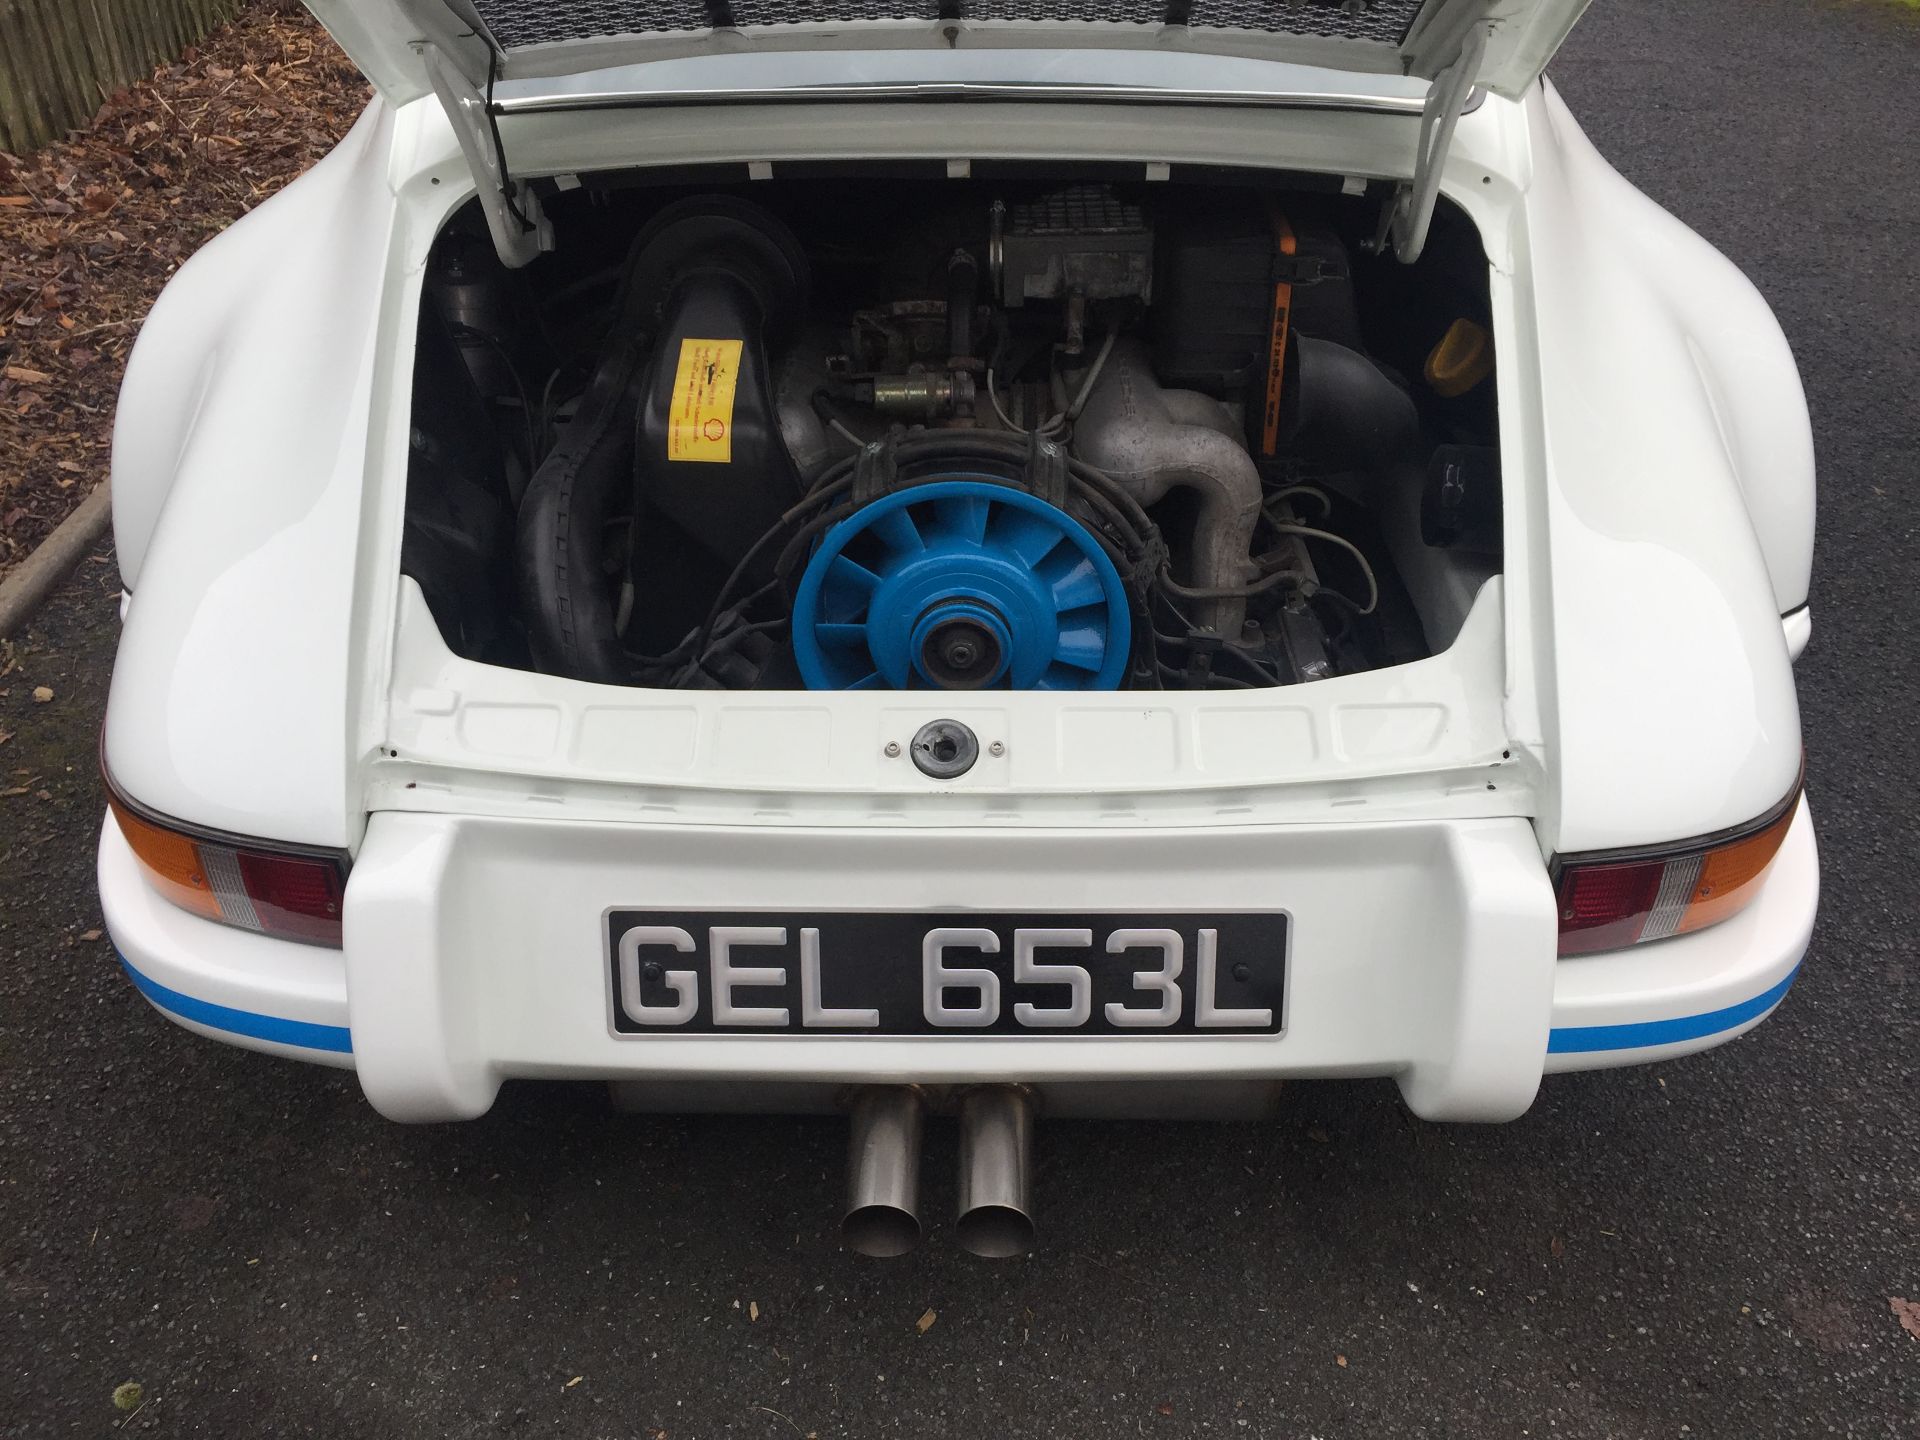 Porsche 911 Carrera 2.7 Rs Recreation - Pro 9 Build Based On A 1986 Porsche 911 **Reserve reduced** - Image 15 of 21